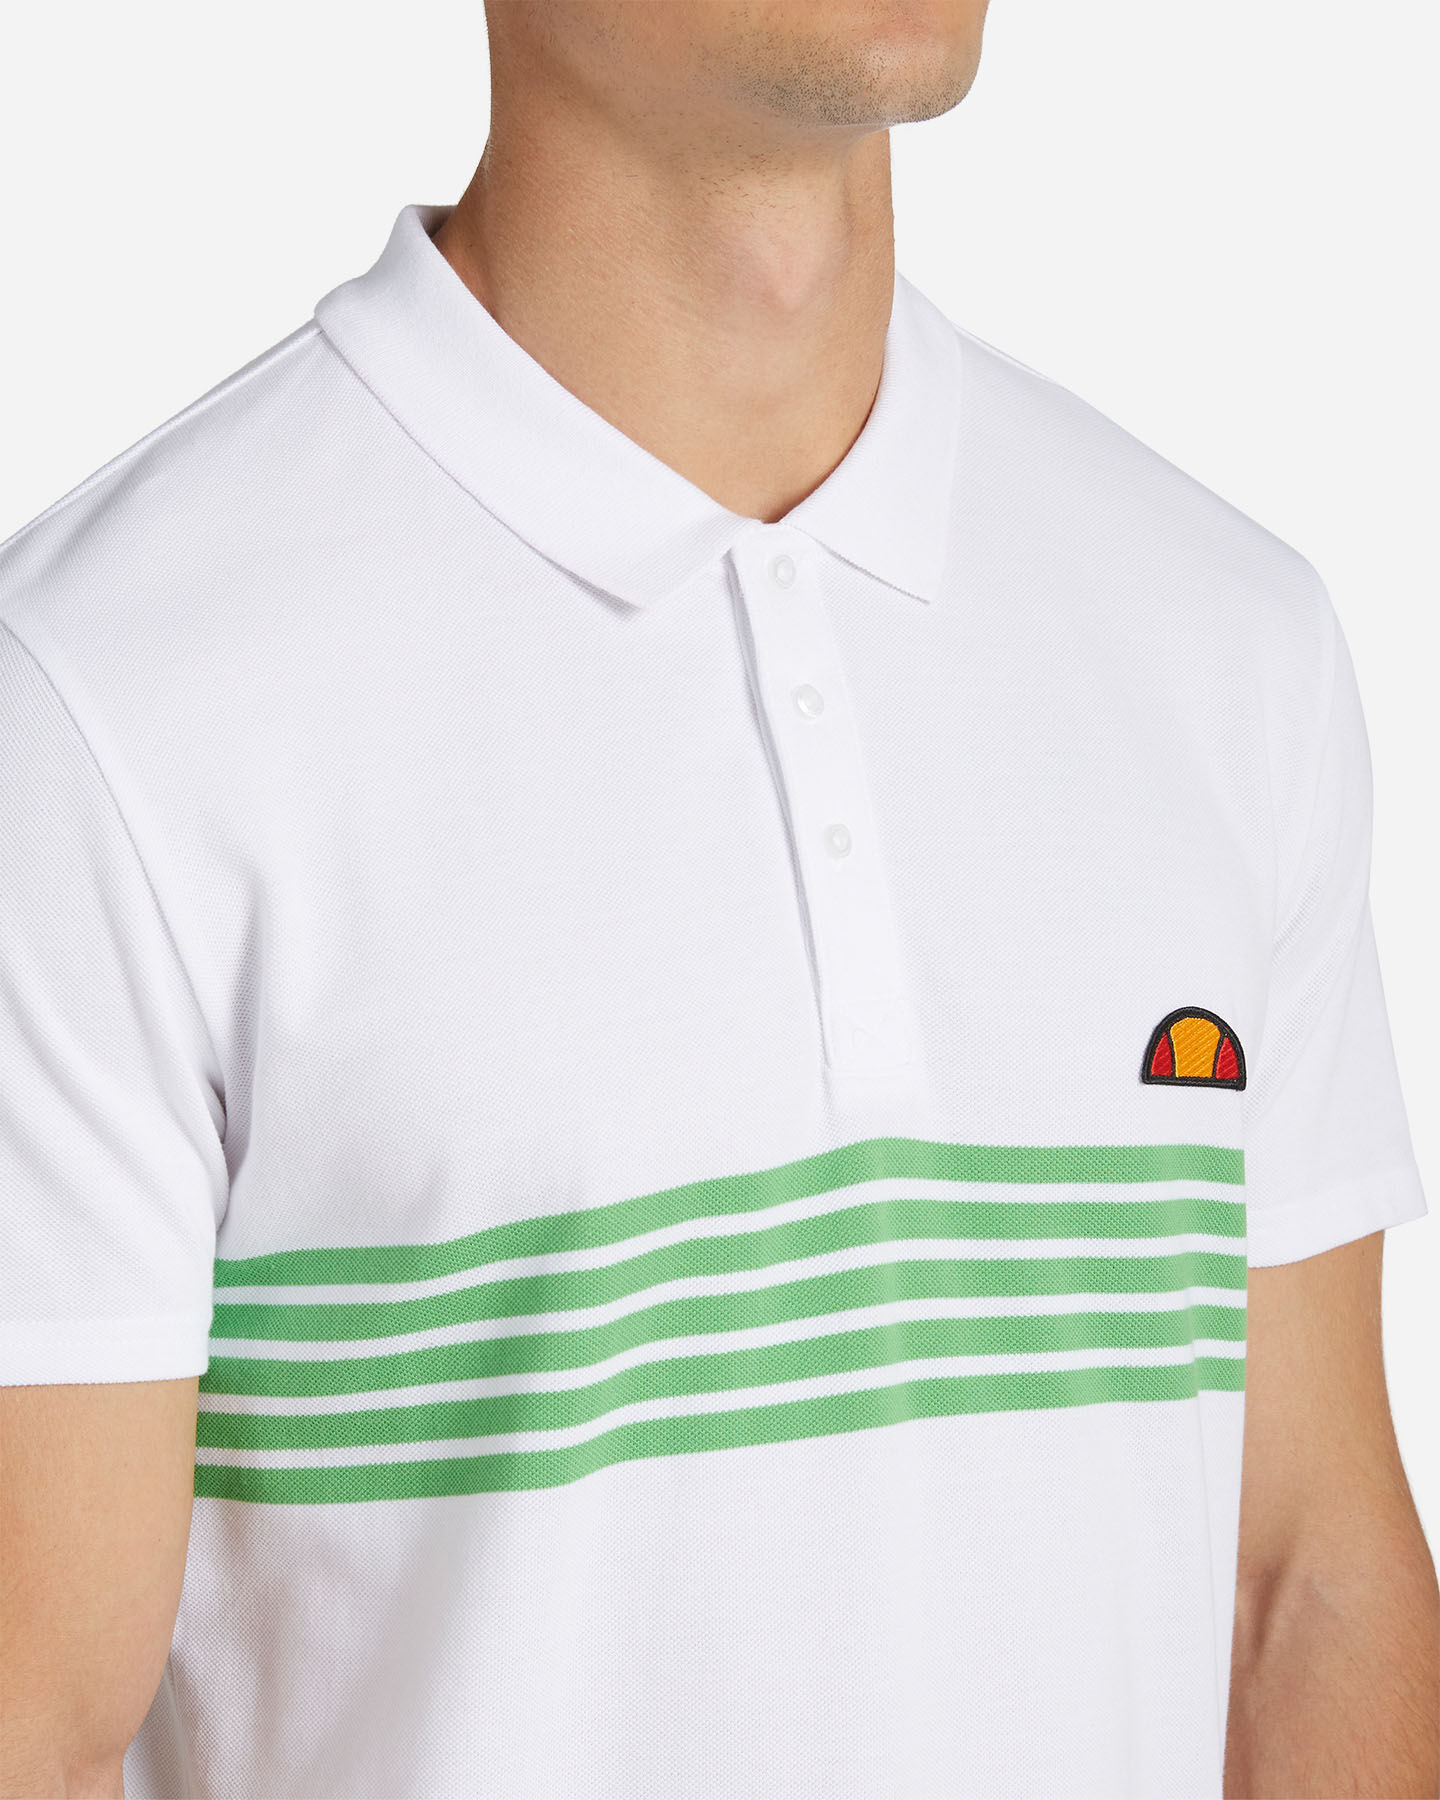  Polo ELLESSE BETTER M S4102121|001|S scatto 4